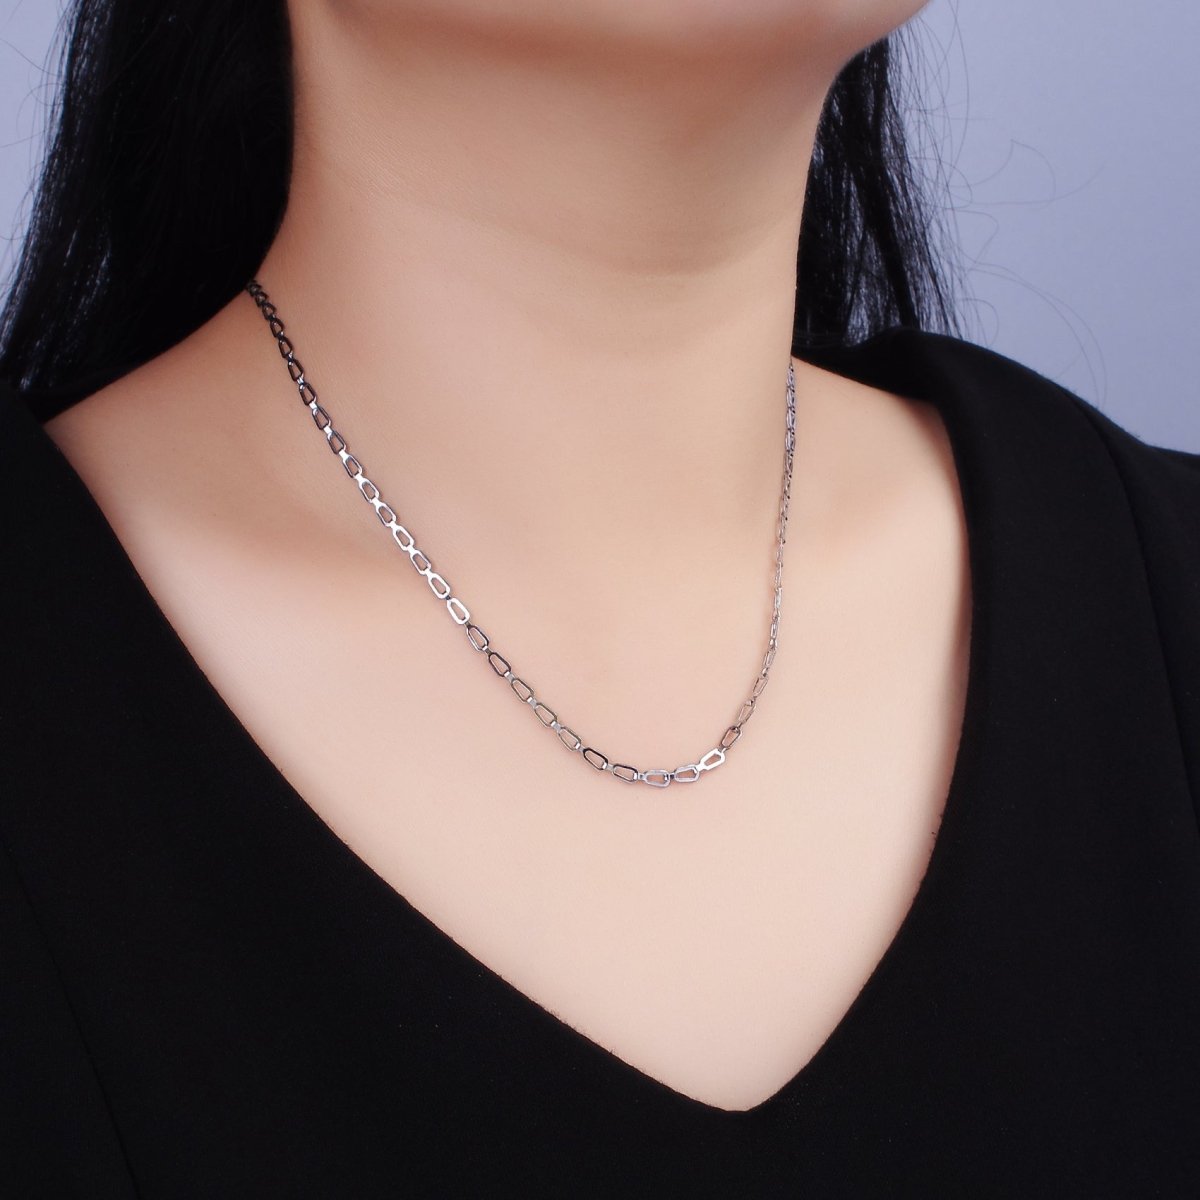 Stainless Steel Flat Oval Cable Chain Necklace 2.7mm Cable Chain Jewelry Making 18 inch Women Necklace | WA-2096 Clearance Pricing - DLUXCA